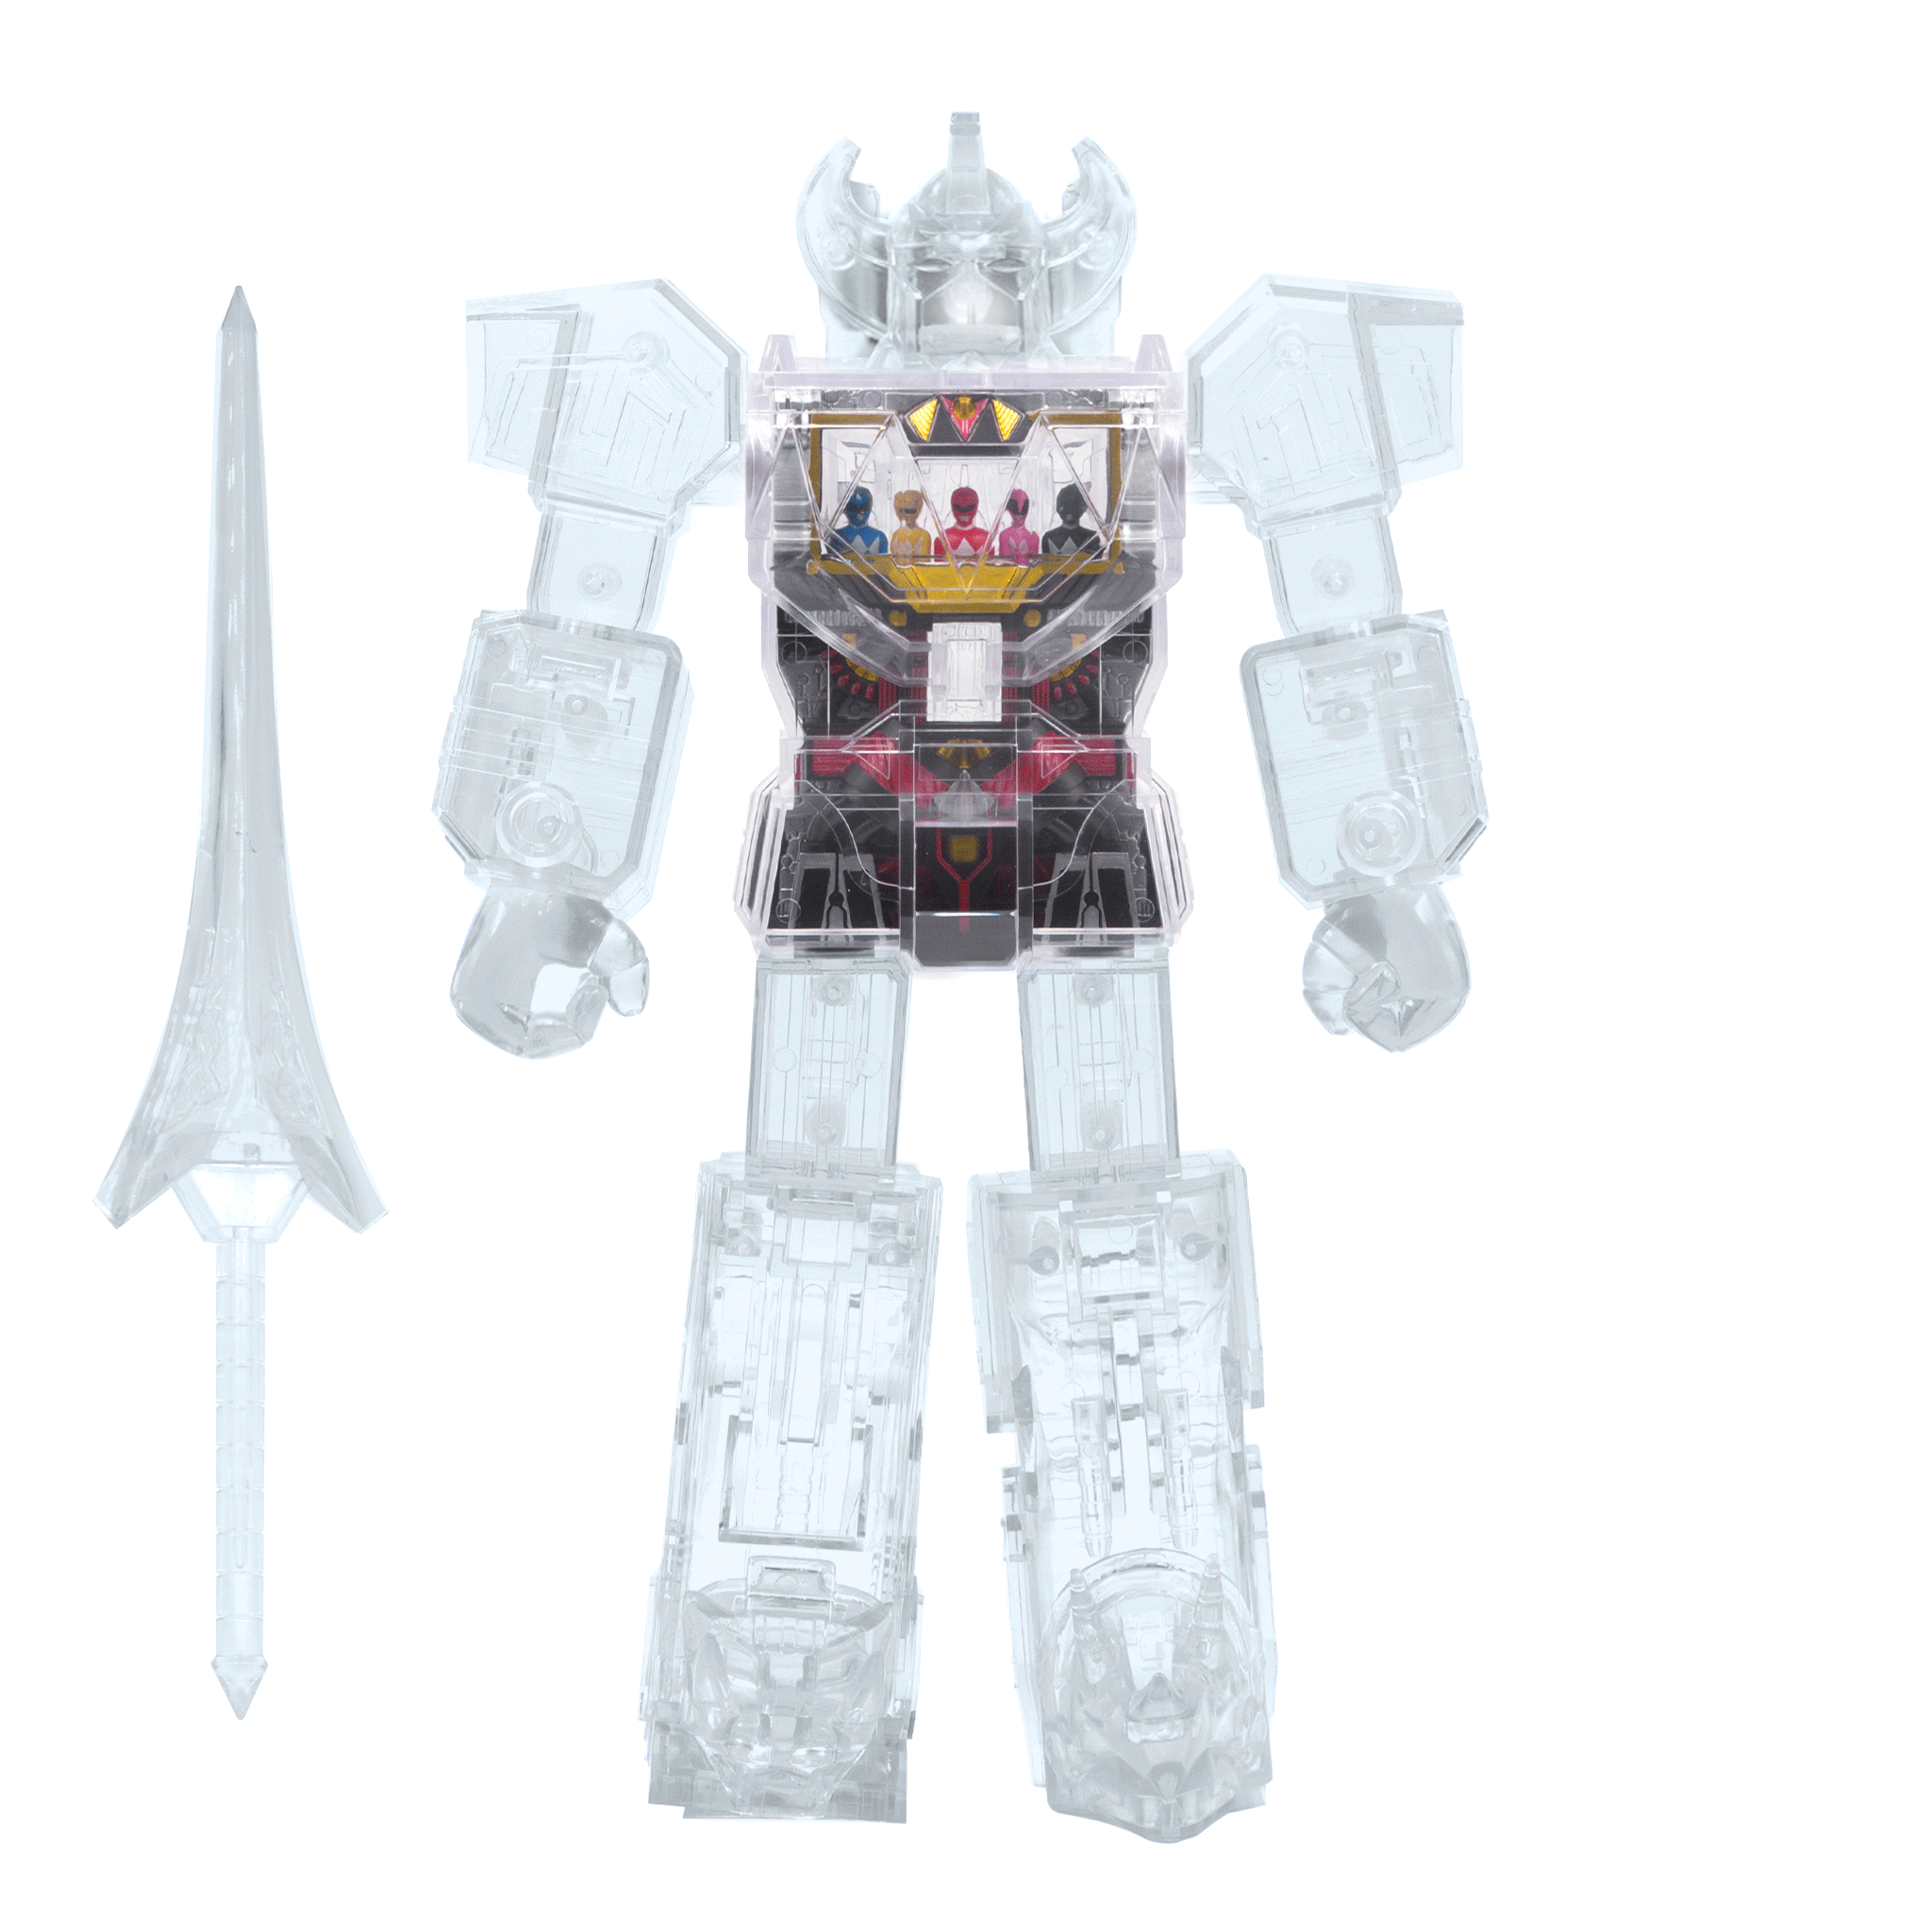 the blot says mighty morphin power rangers super cyborg megazord clear edition figure by super7 tupac jedi small